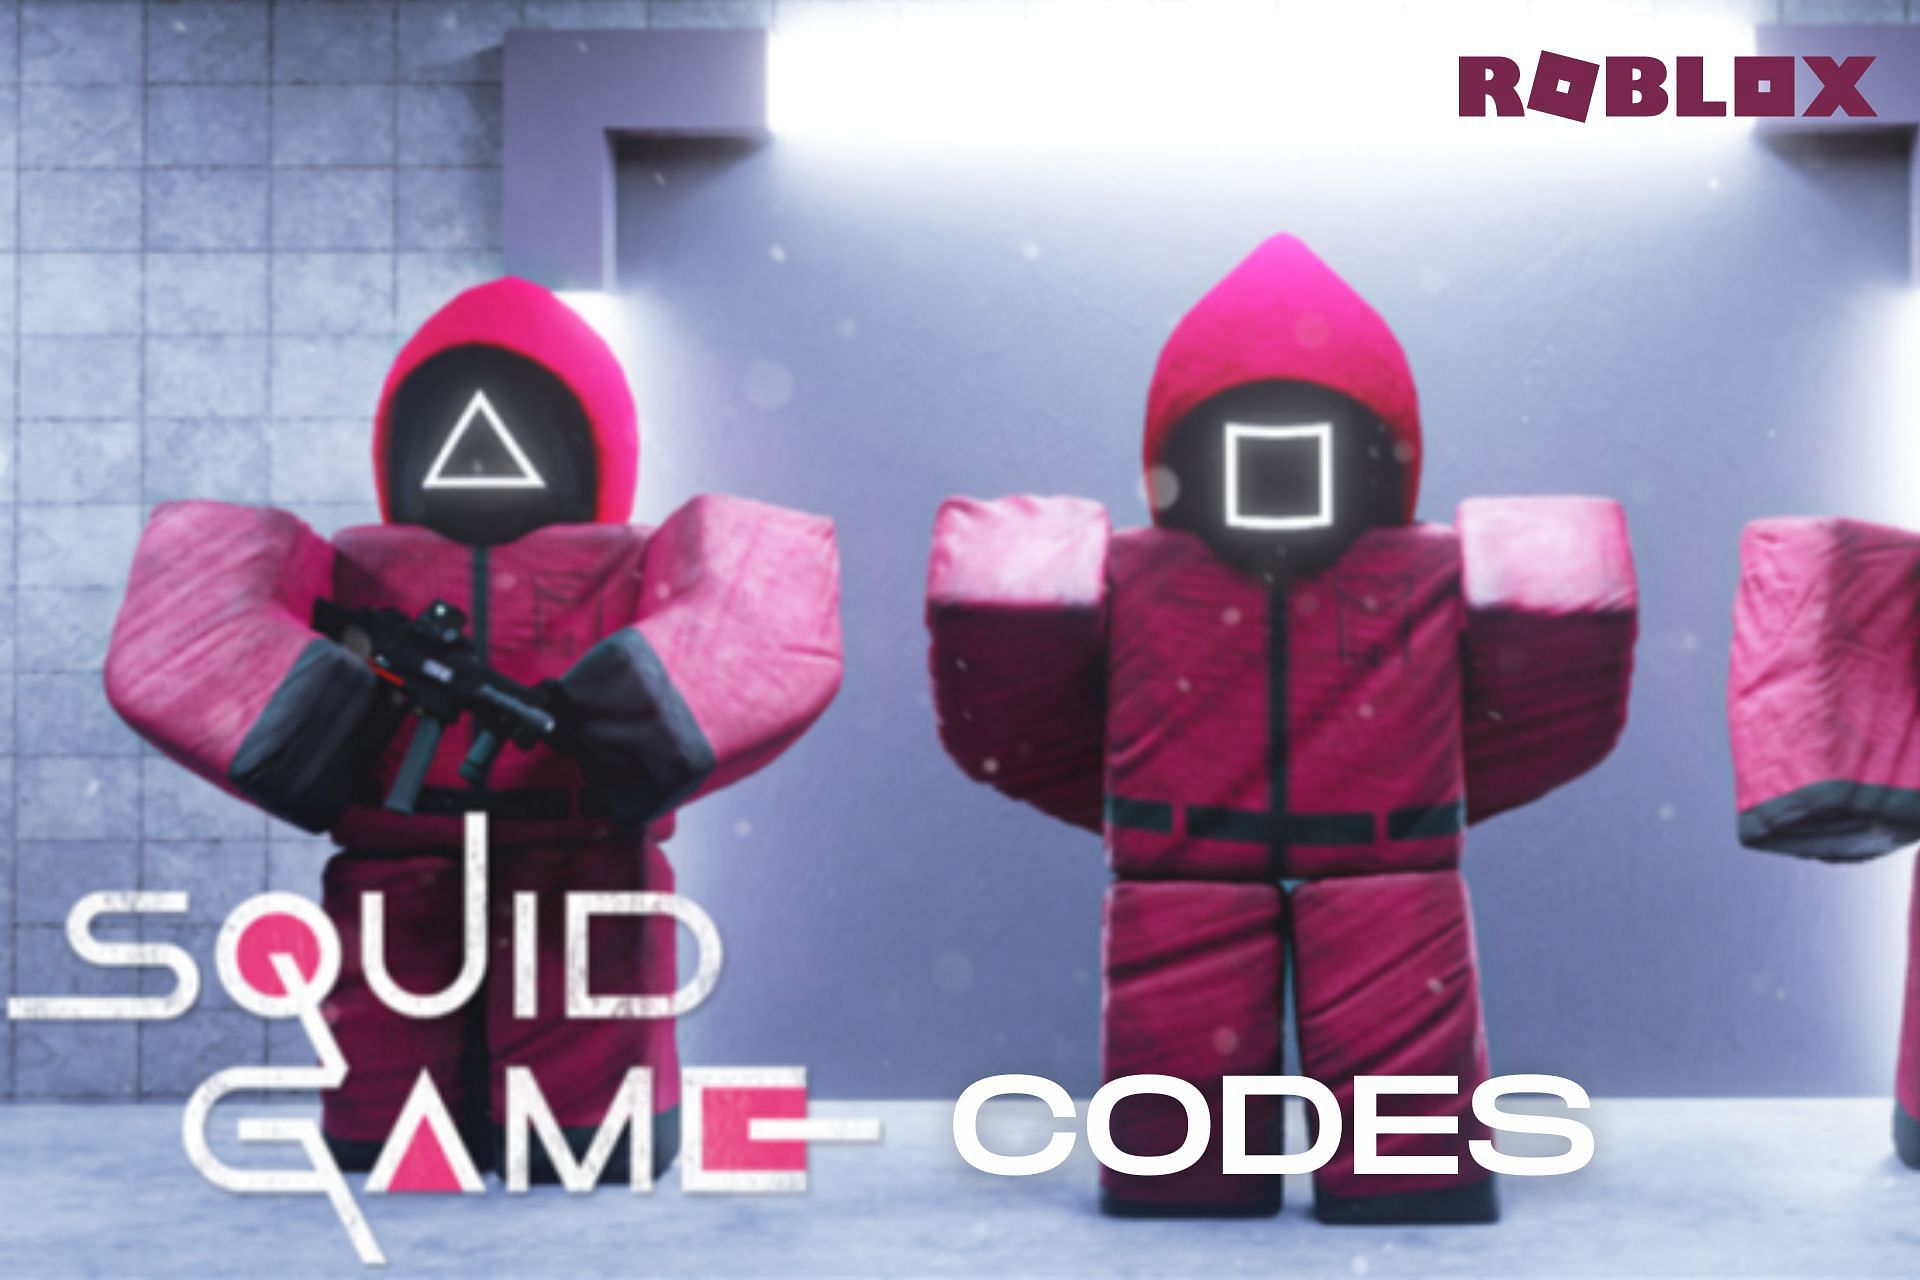 Roblox Squid Game Codes (December 2022): Free Skins, Cash, And More